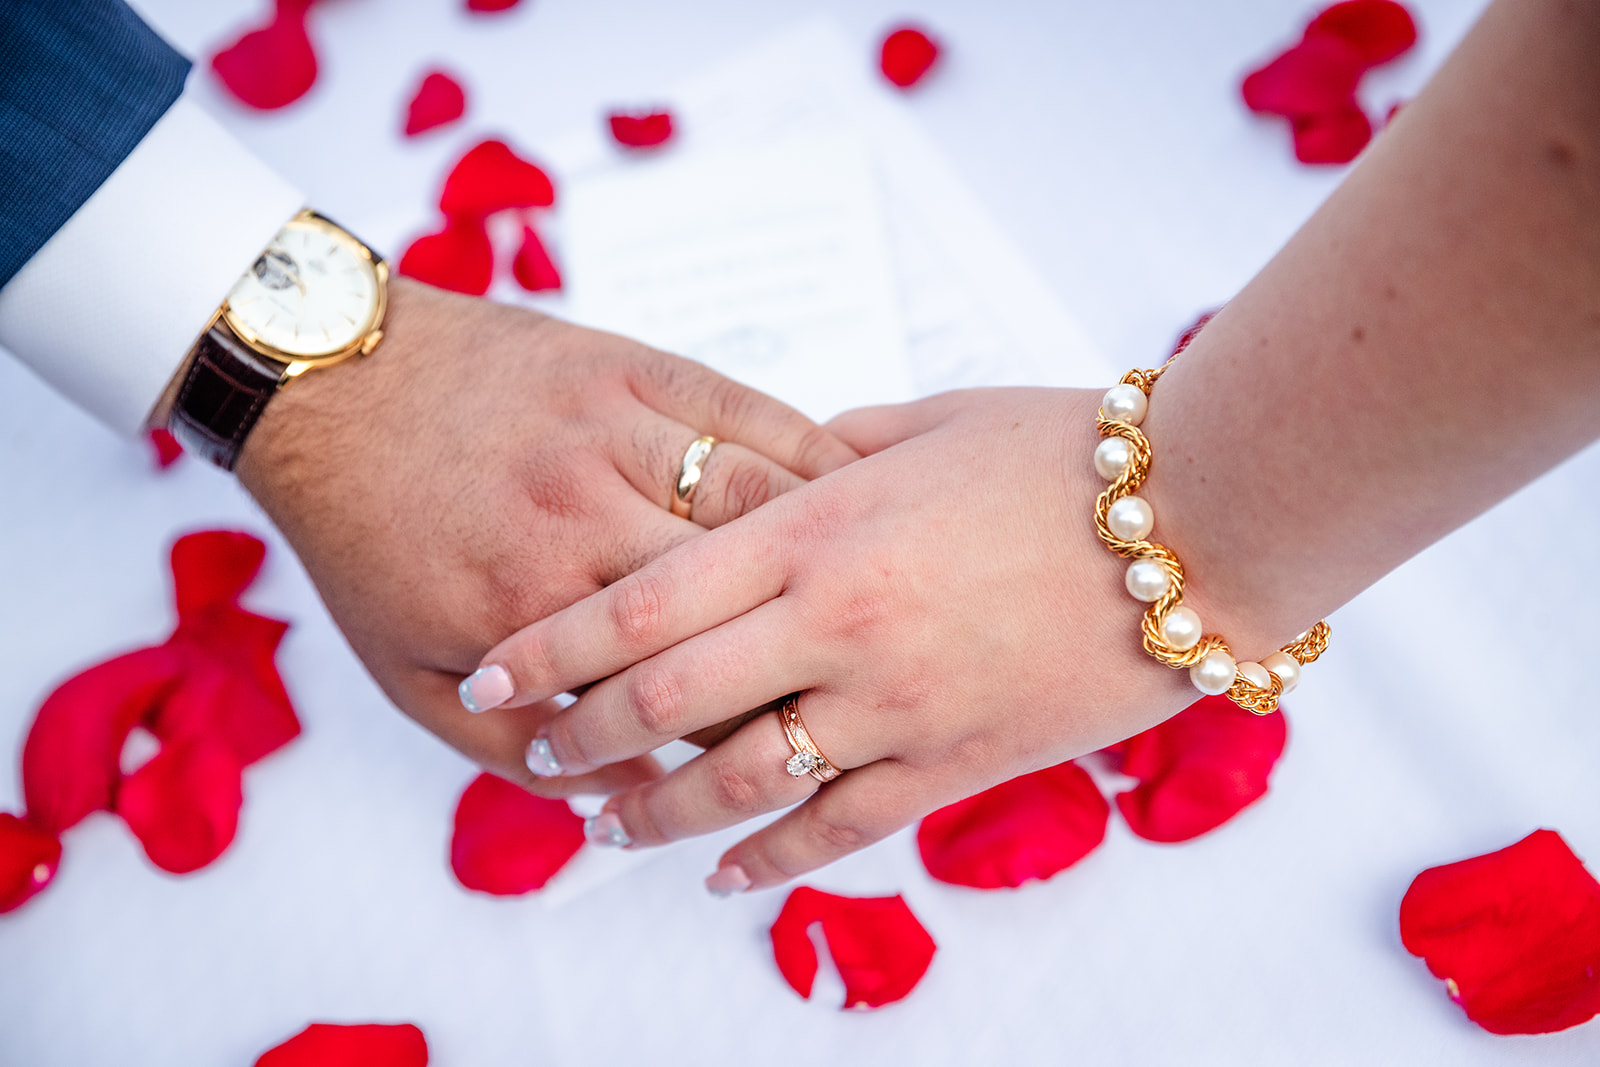 Bride and Groom holding hands with rose pedals in background